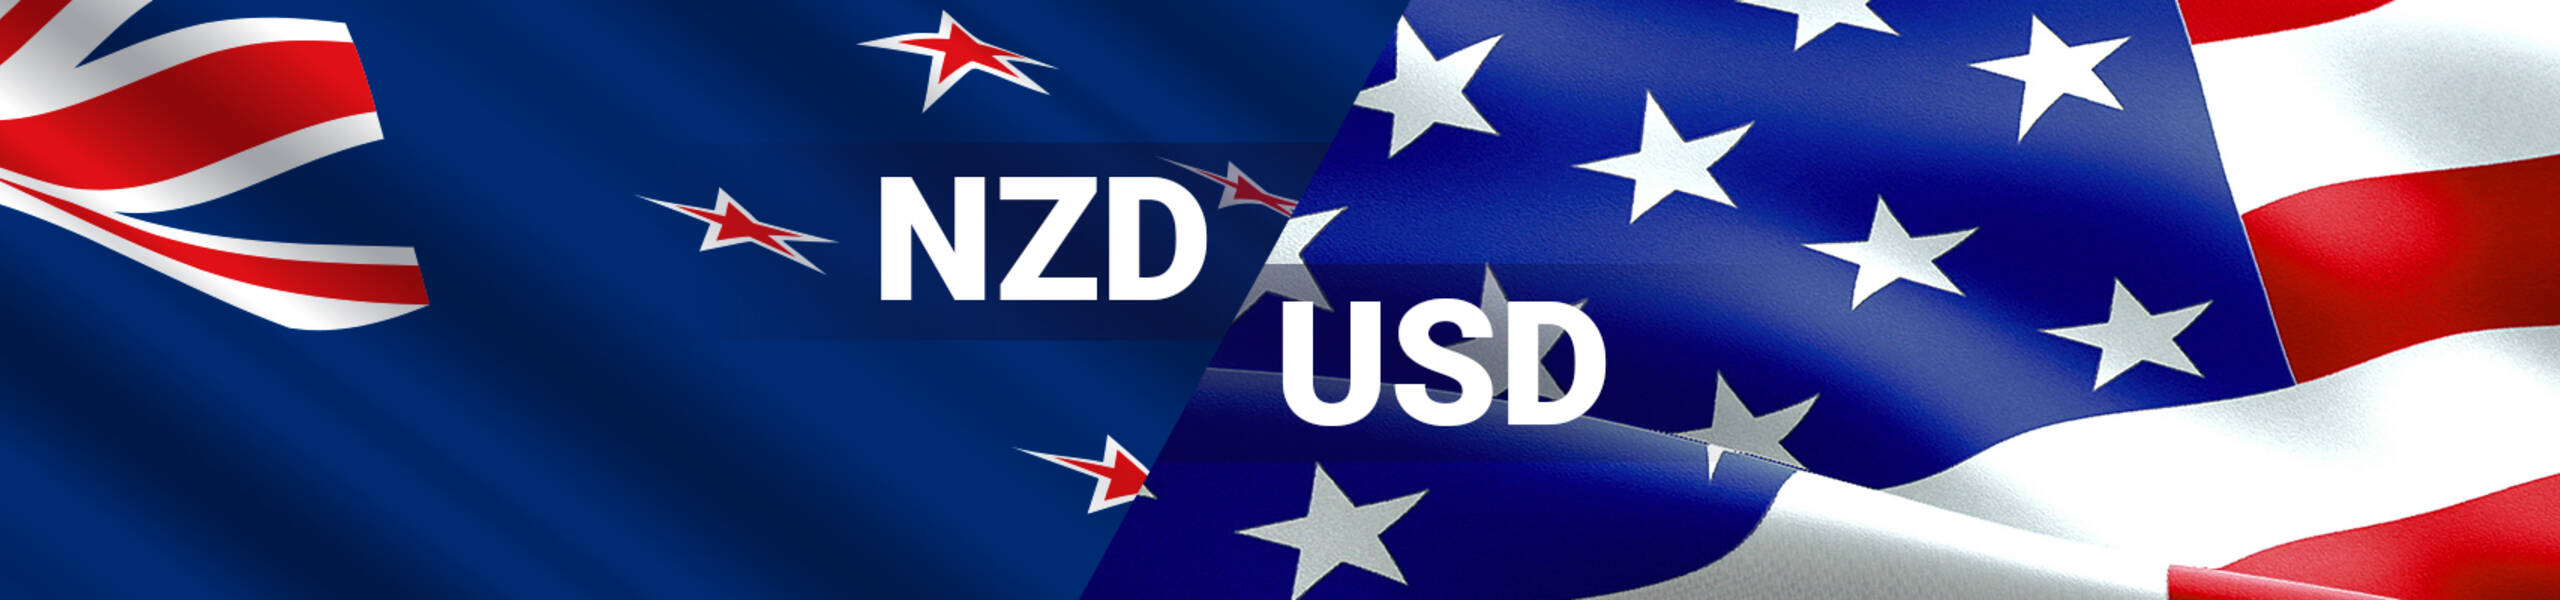 NZD/USD: kiwi is waiting for a signal